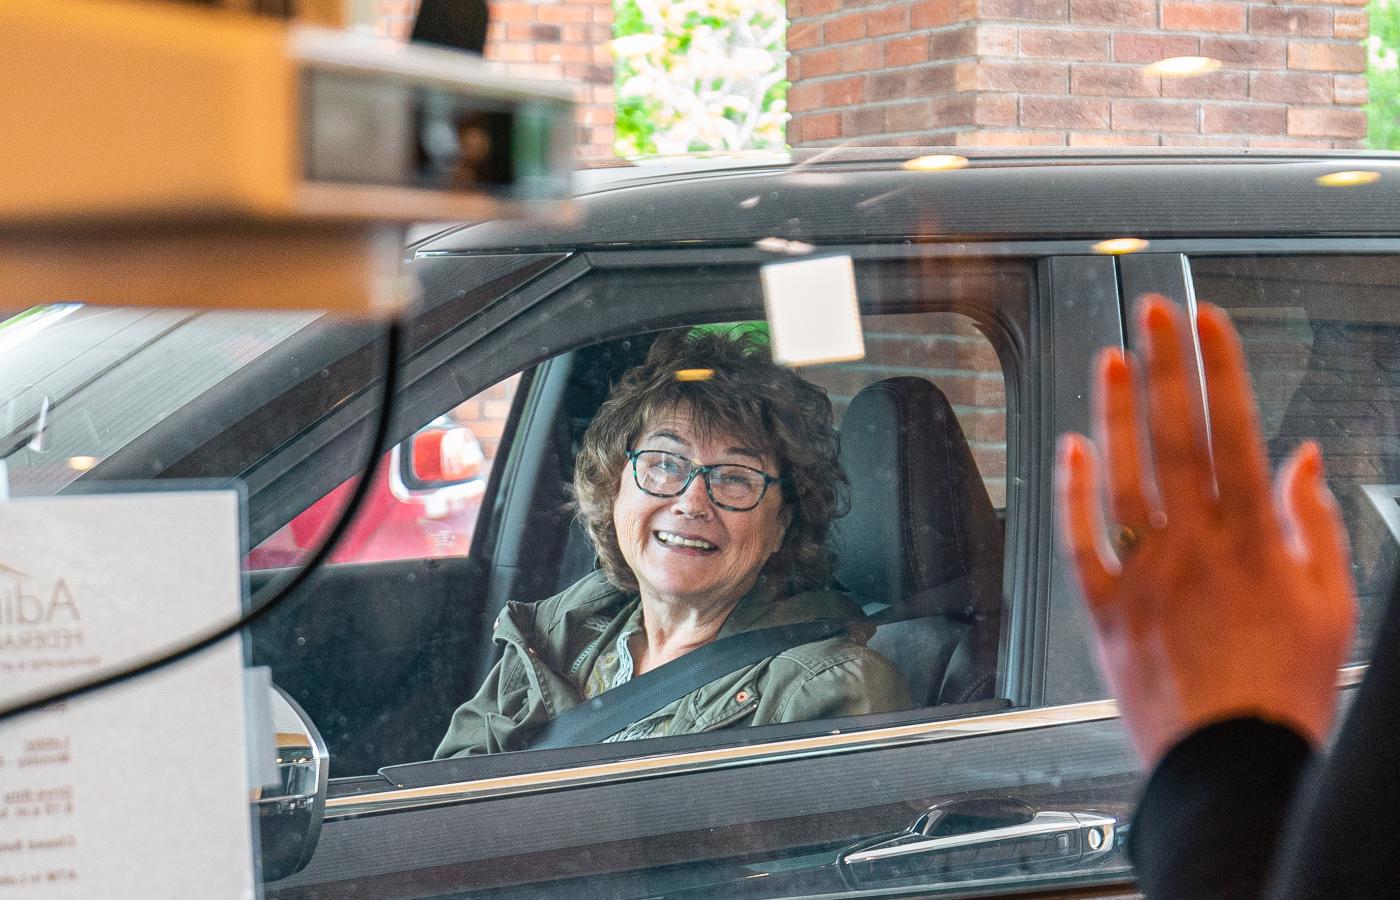 woman in her car happily using the drive thru banking services at the Plattsburgh Branch of Adirondack Regional Federal Credit Union